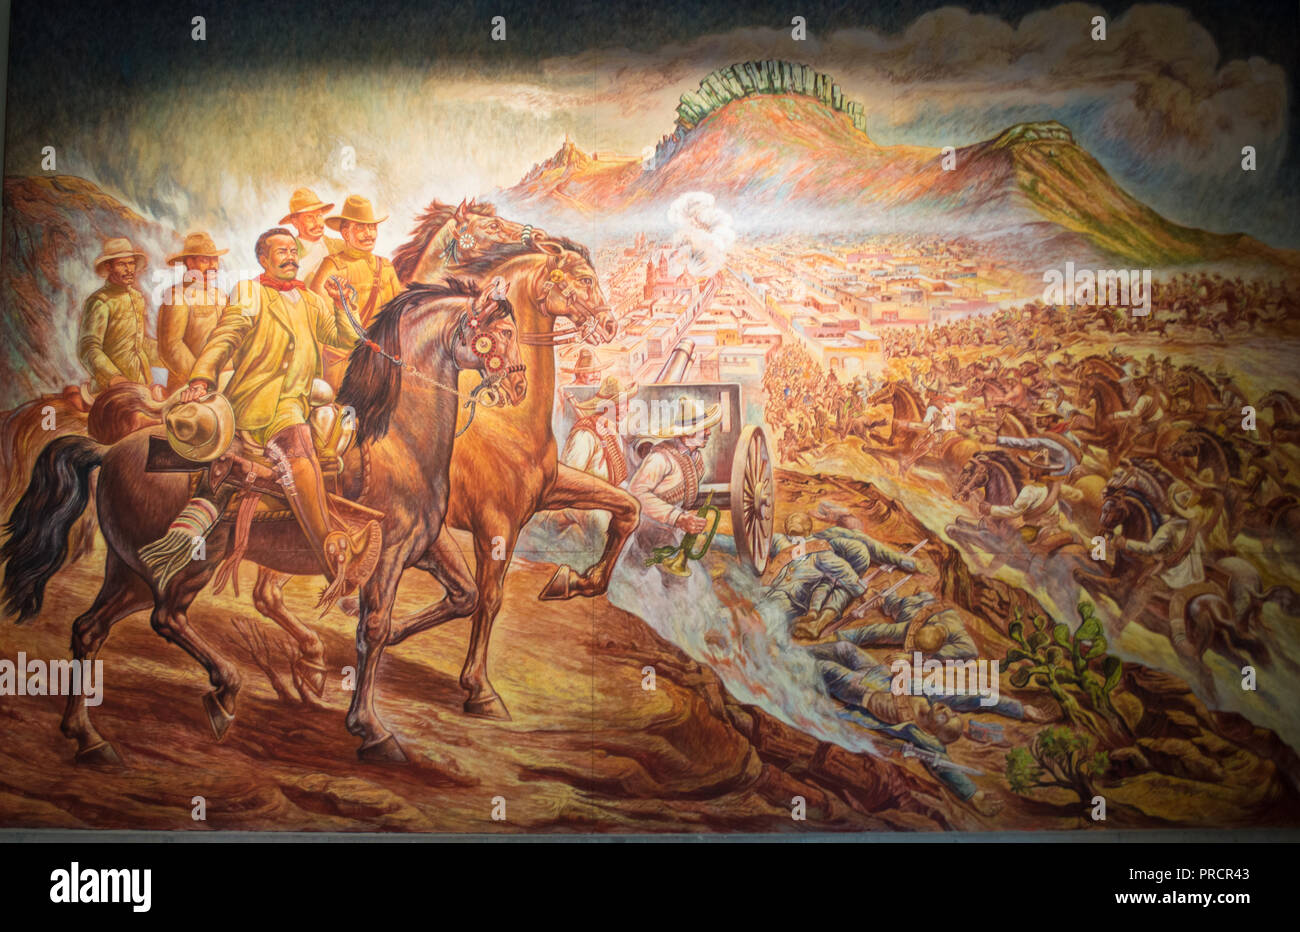 Impressive mural by Ángel Boliver  at the Chapultepec Castle, Mexico. It depicts the battle of Zacatecas. Stock Photo